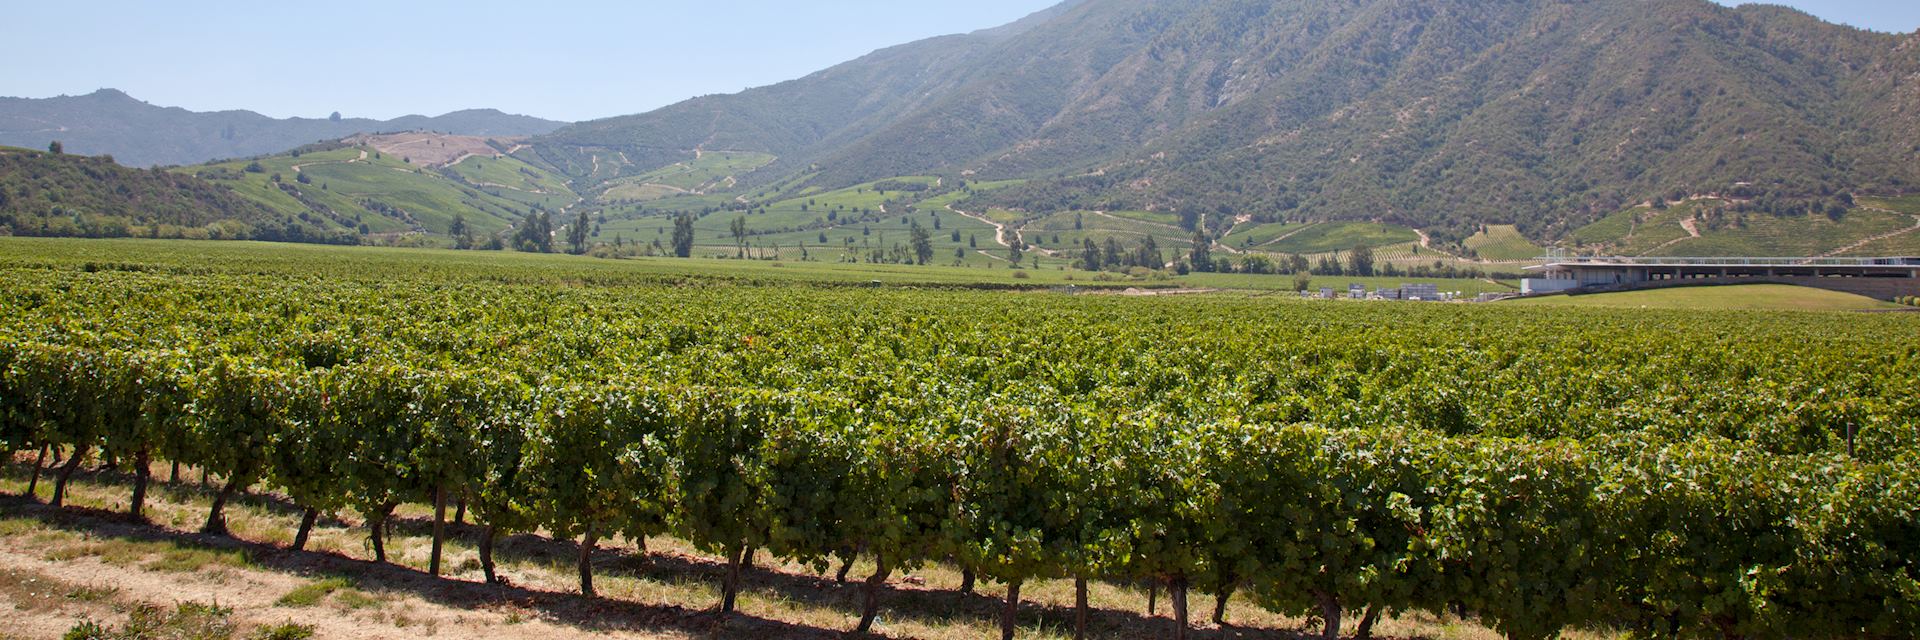 Vineyard in the Colchagua Valley